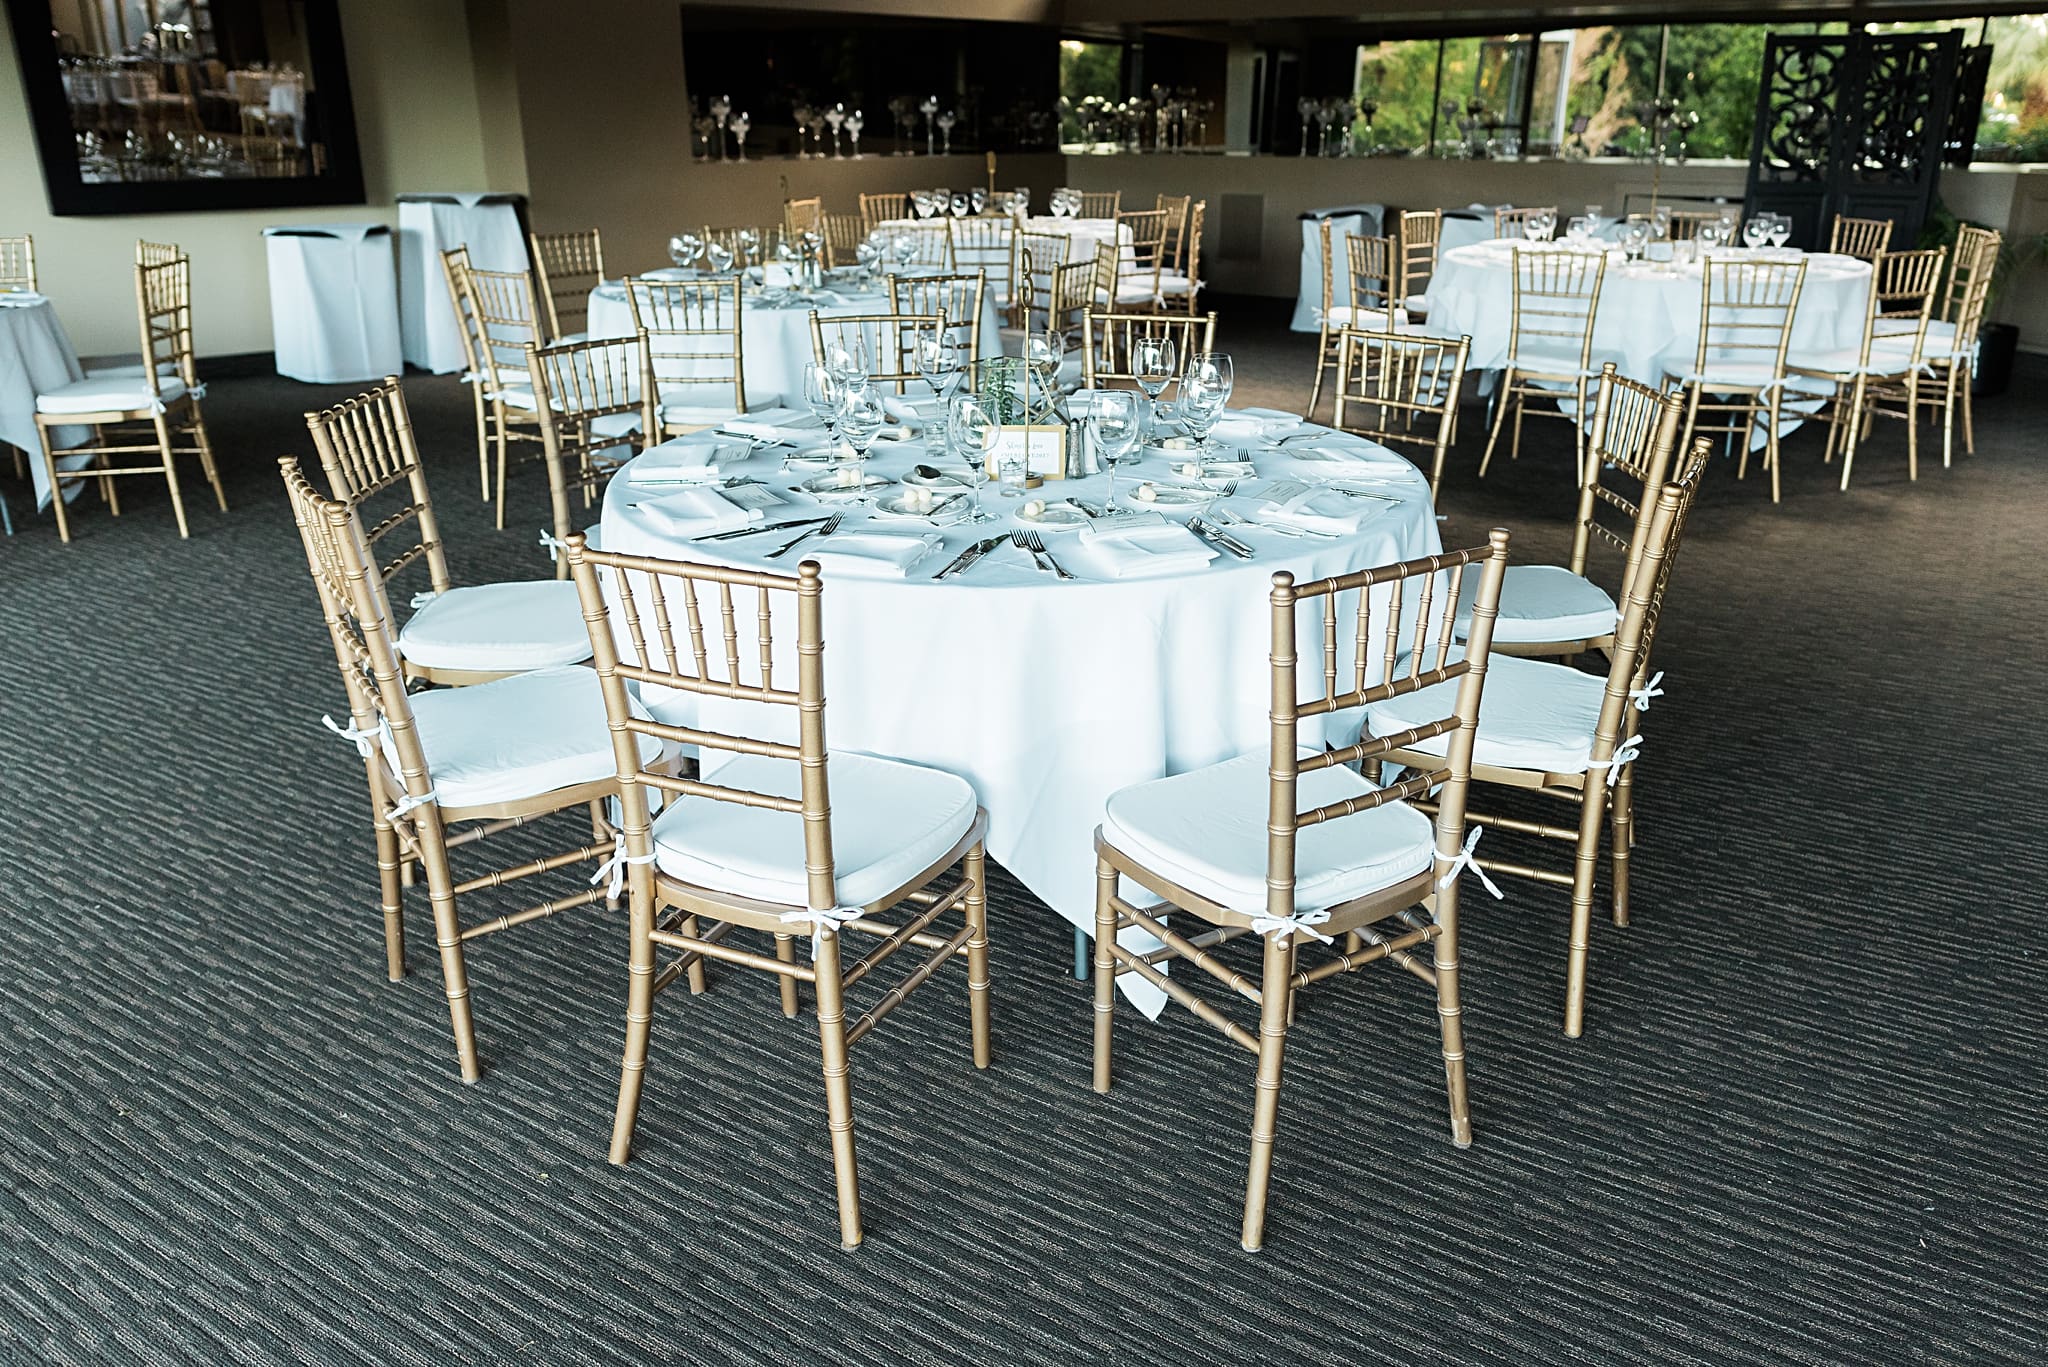 gold rental chairs for wedding reception